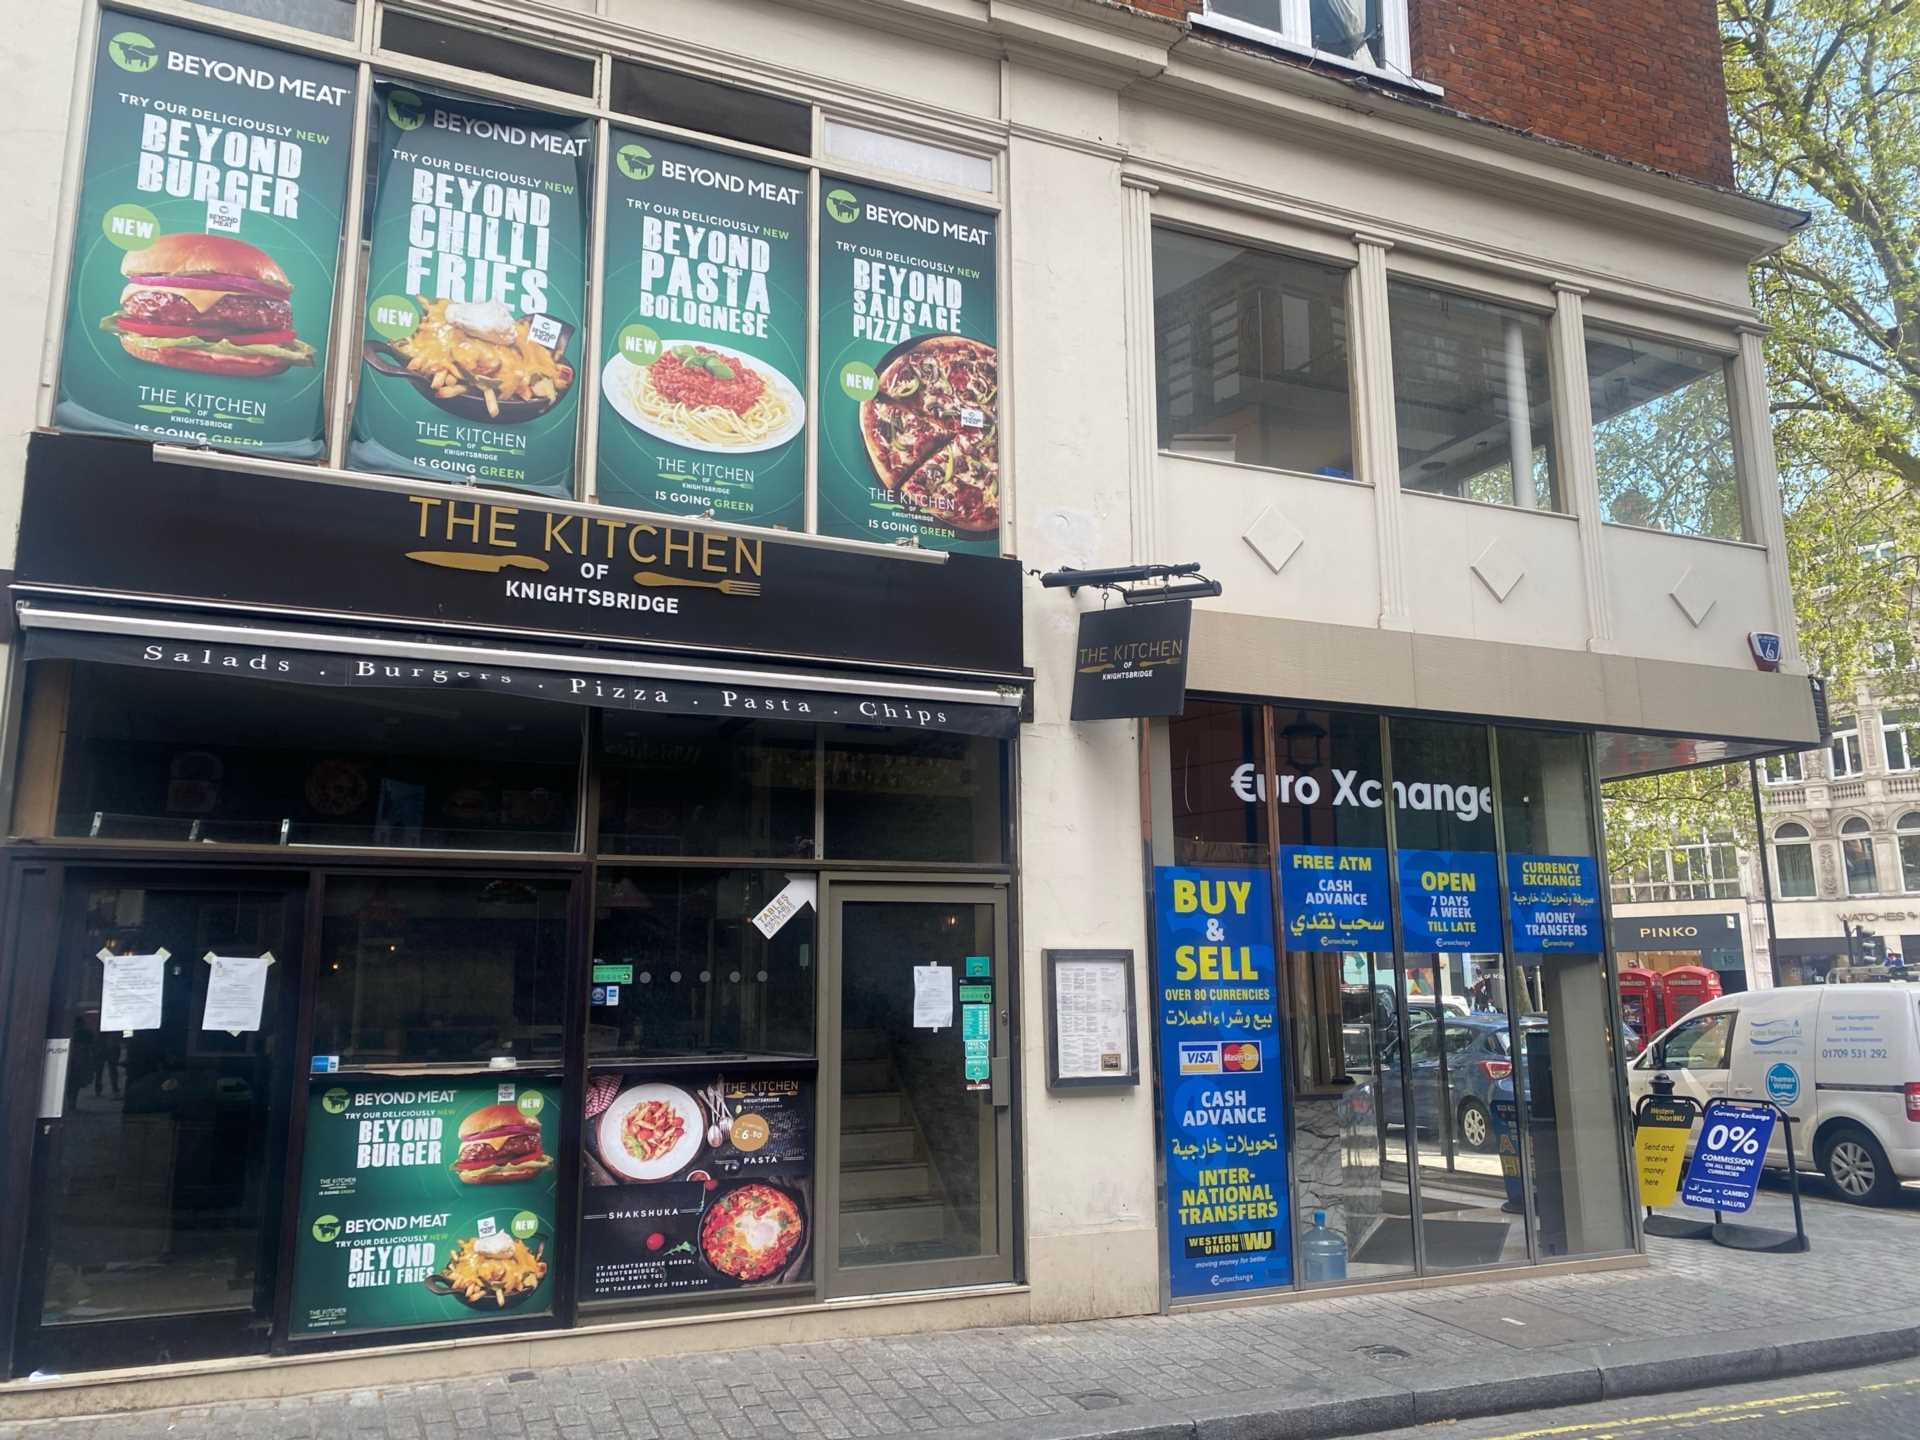 0 bed Restaurant for rent in London. From Next Property - London